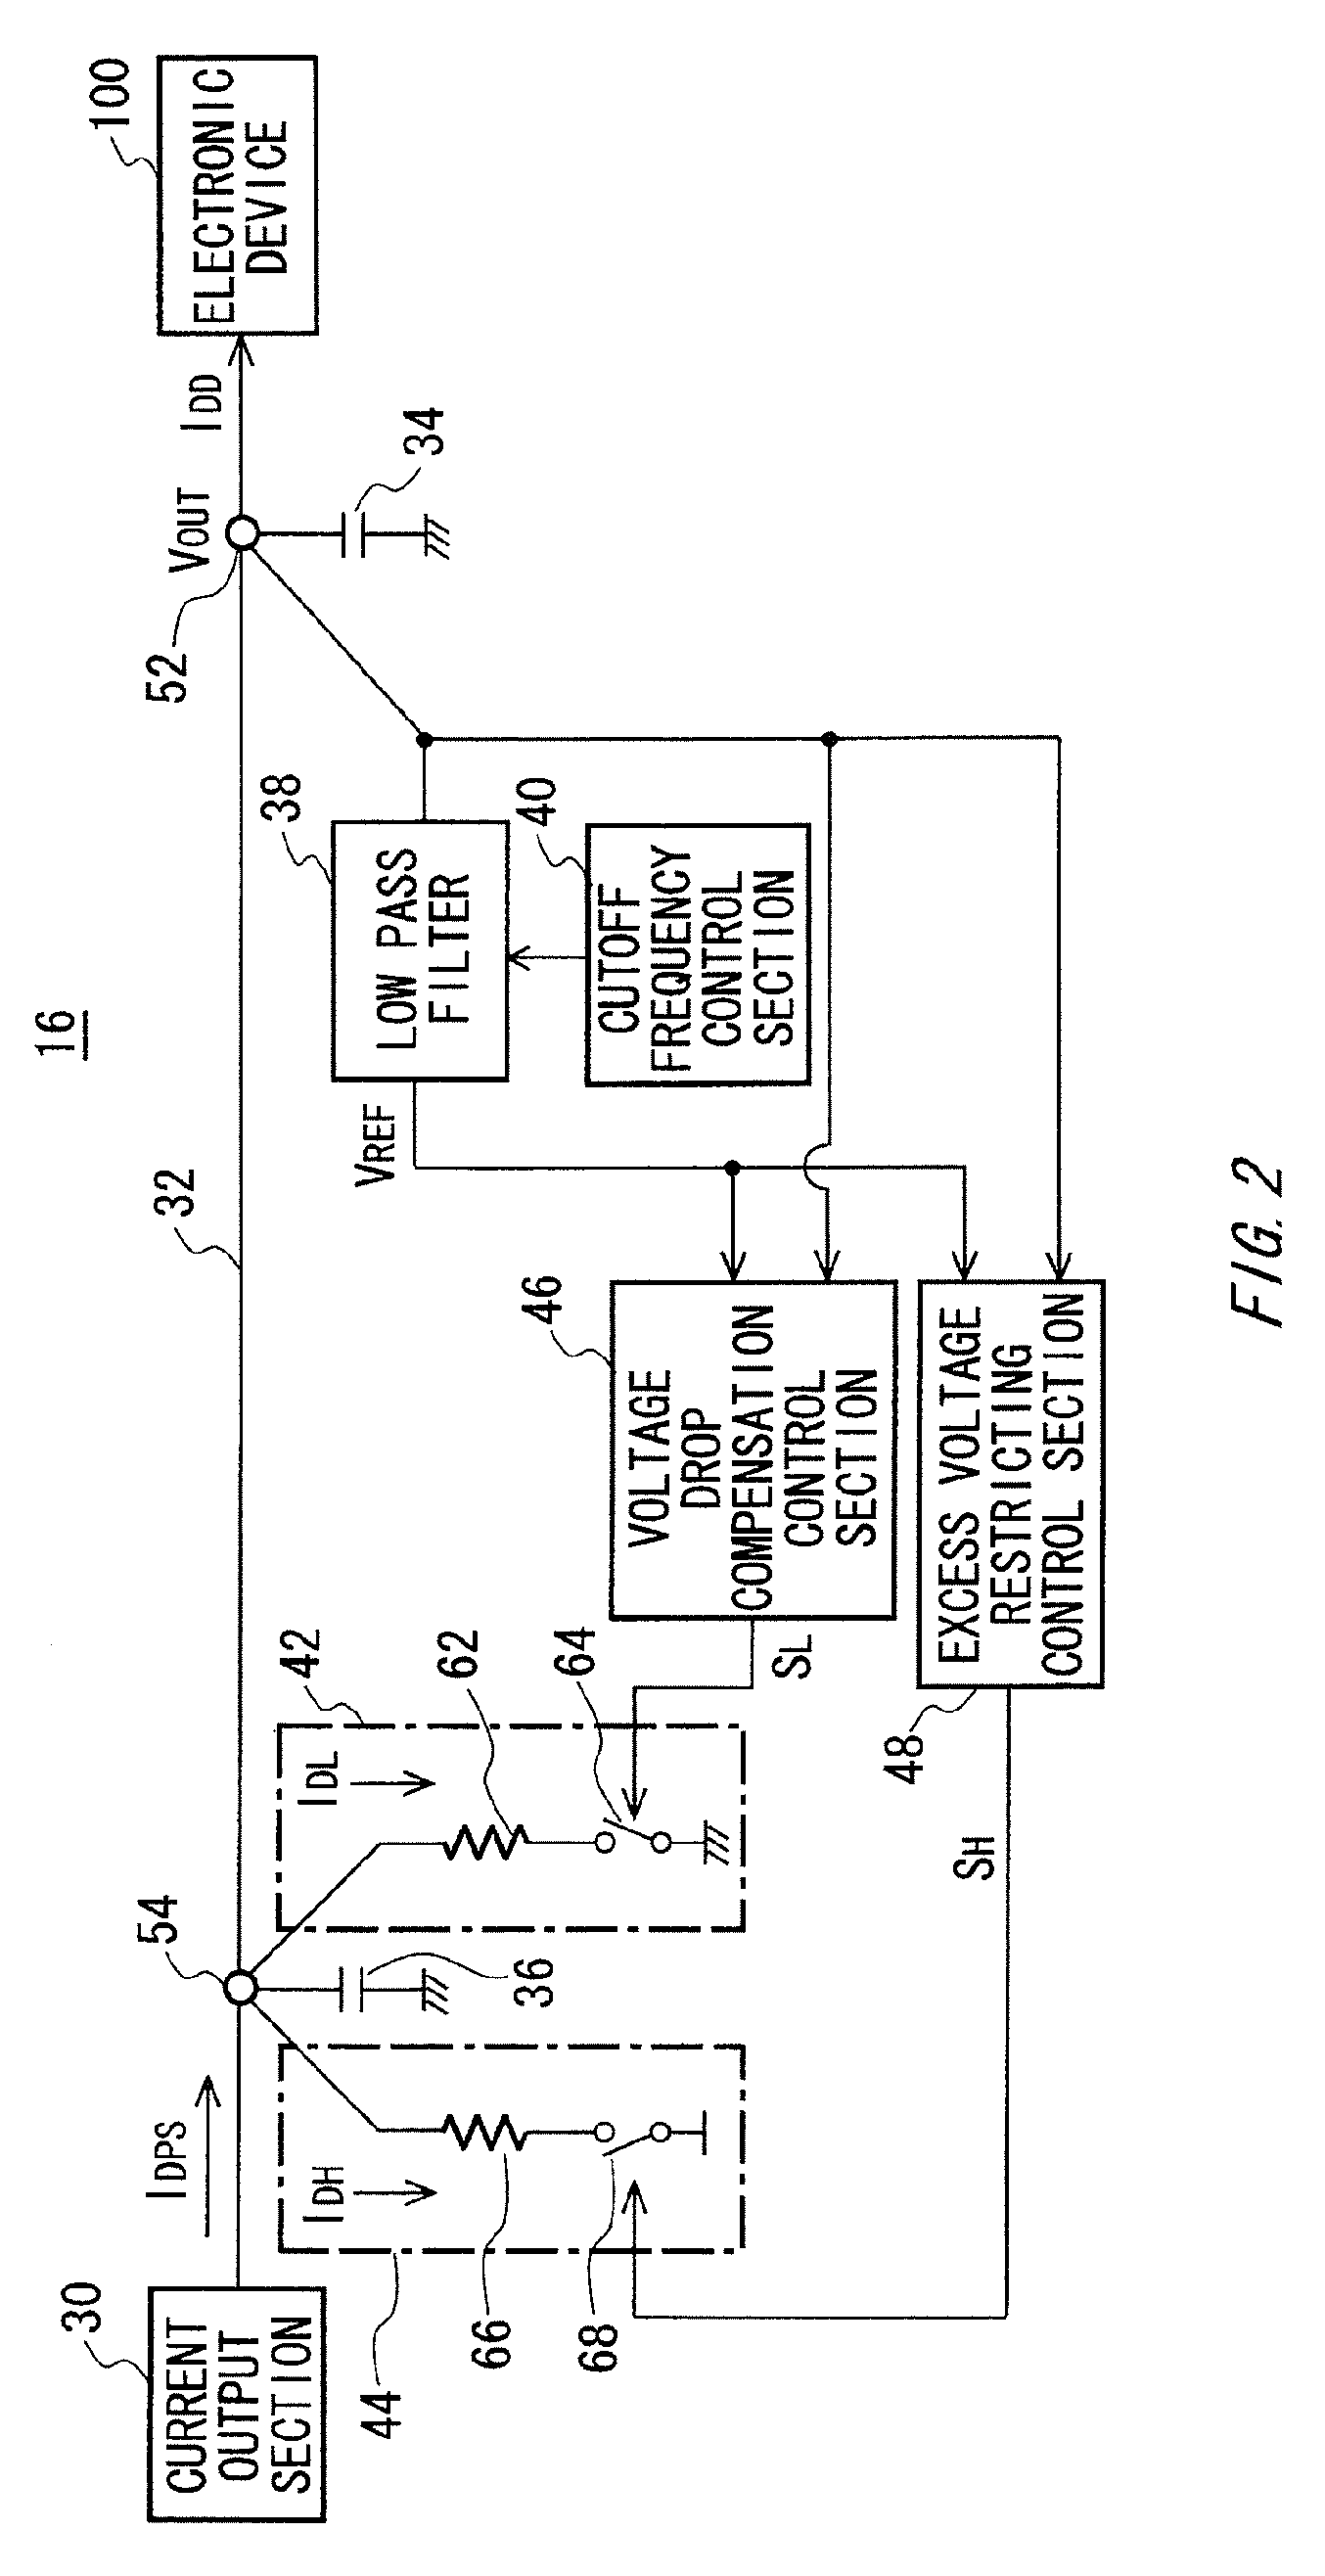 Power supply and stabilizer